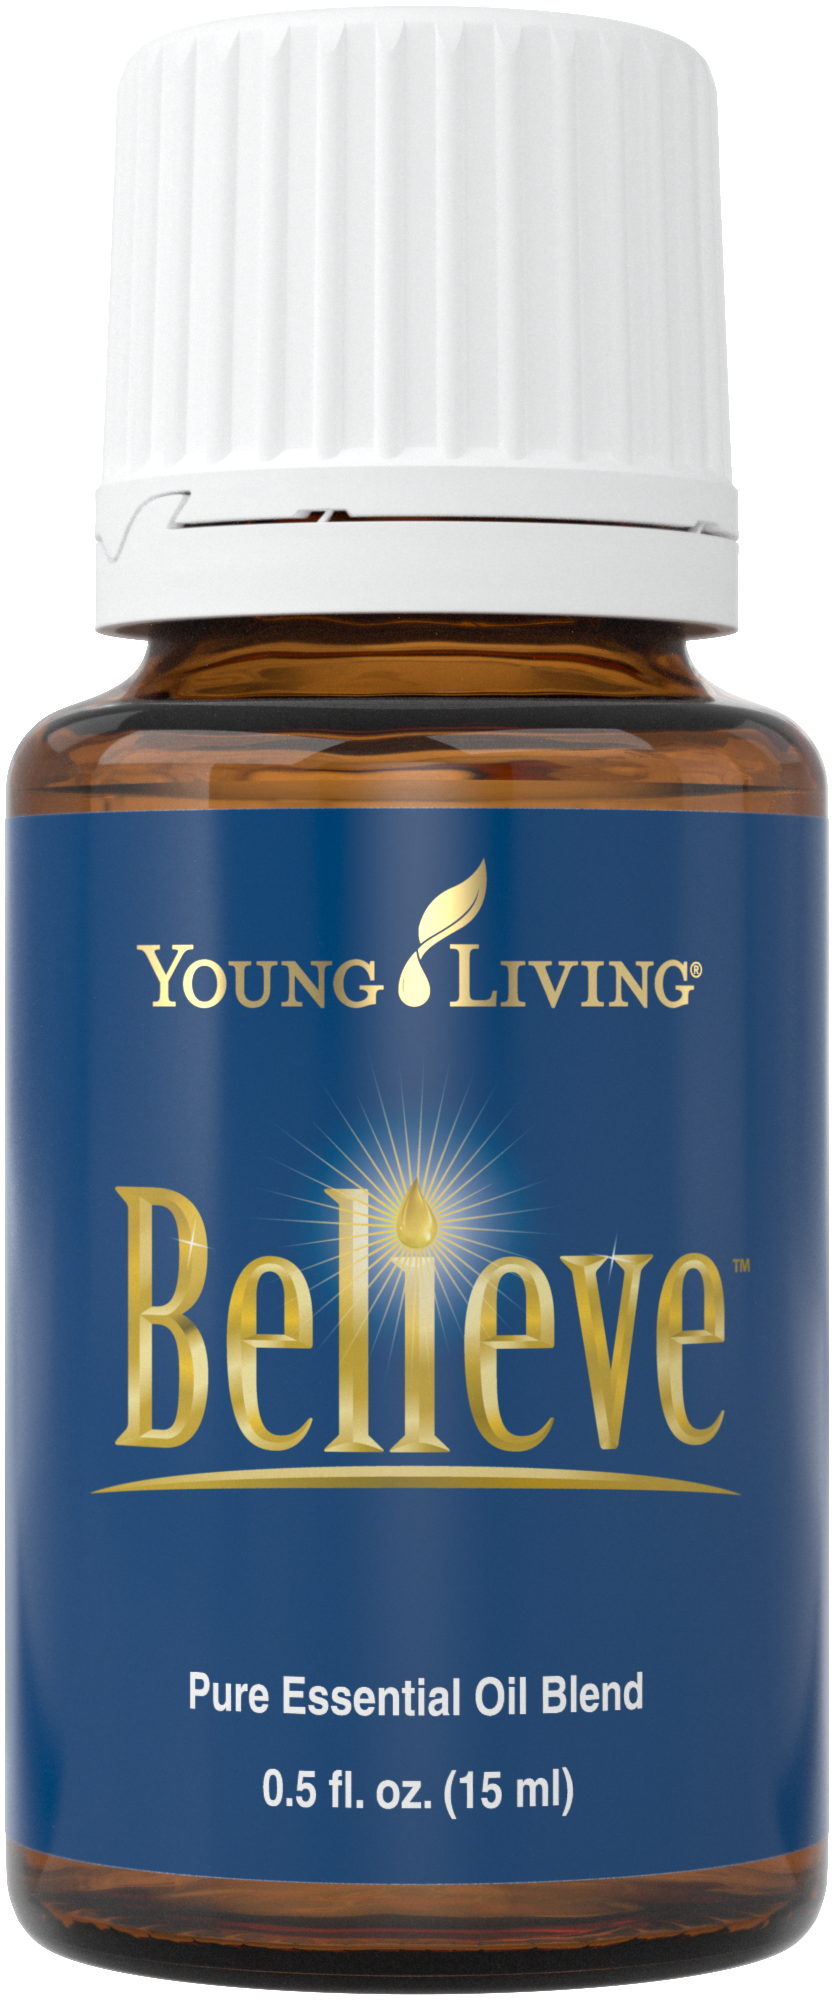 Believe Essential Oil Blend - Young Living Essential Oils 